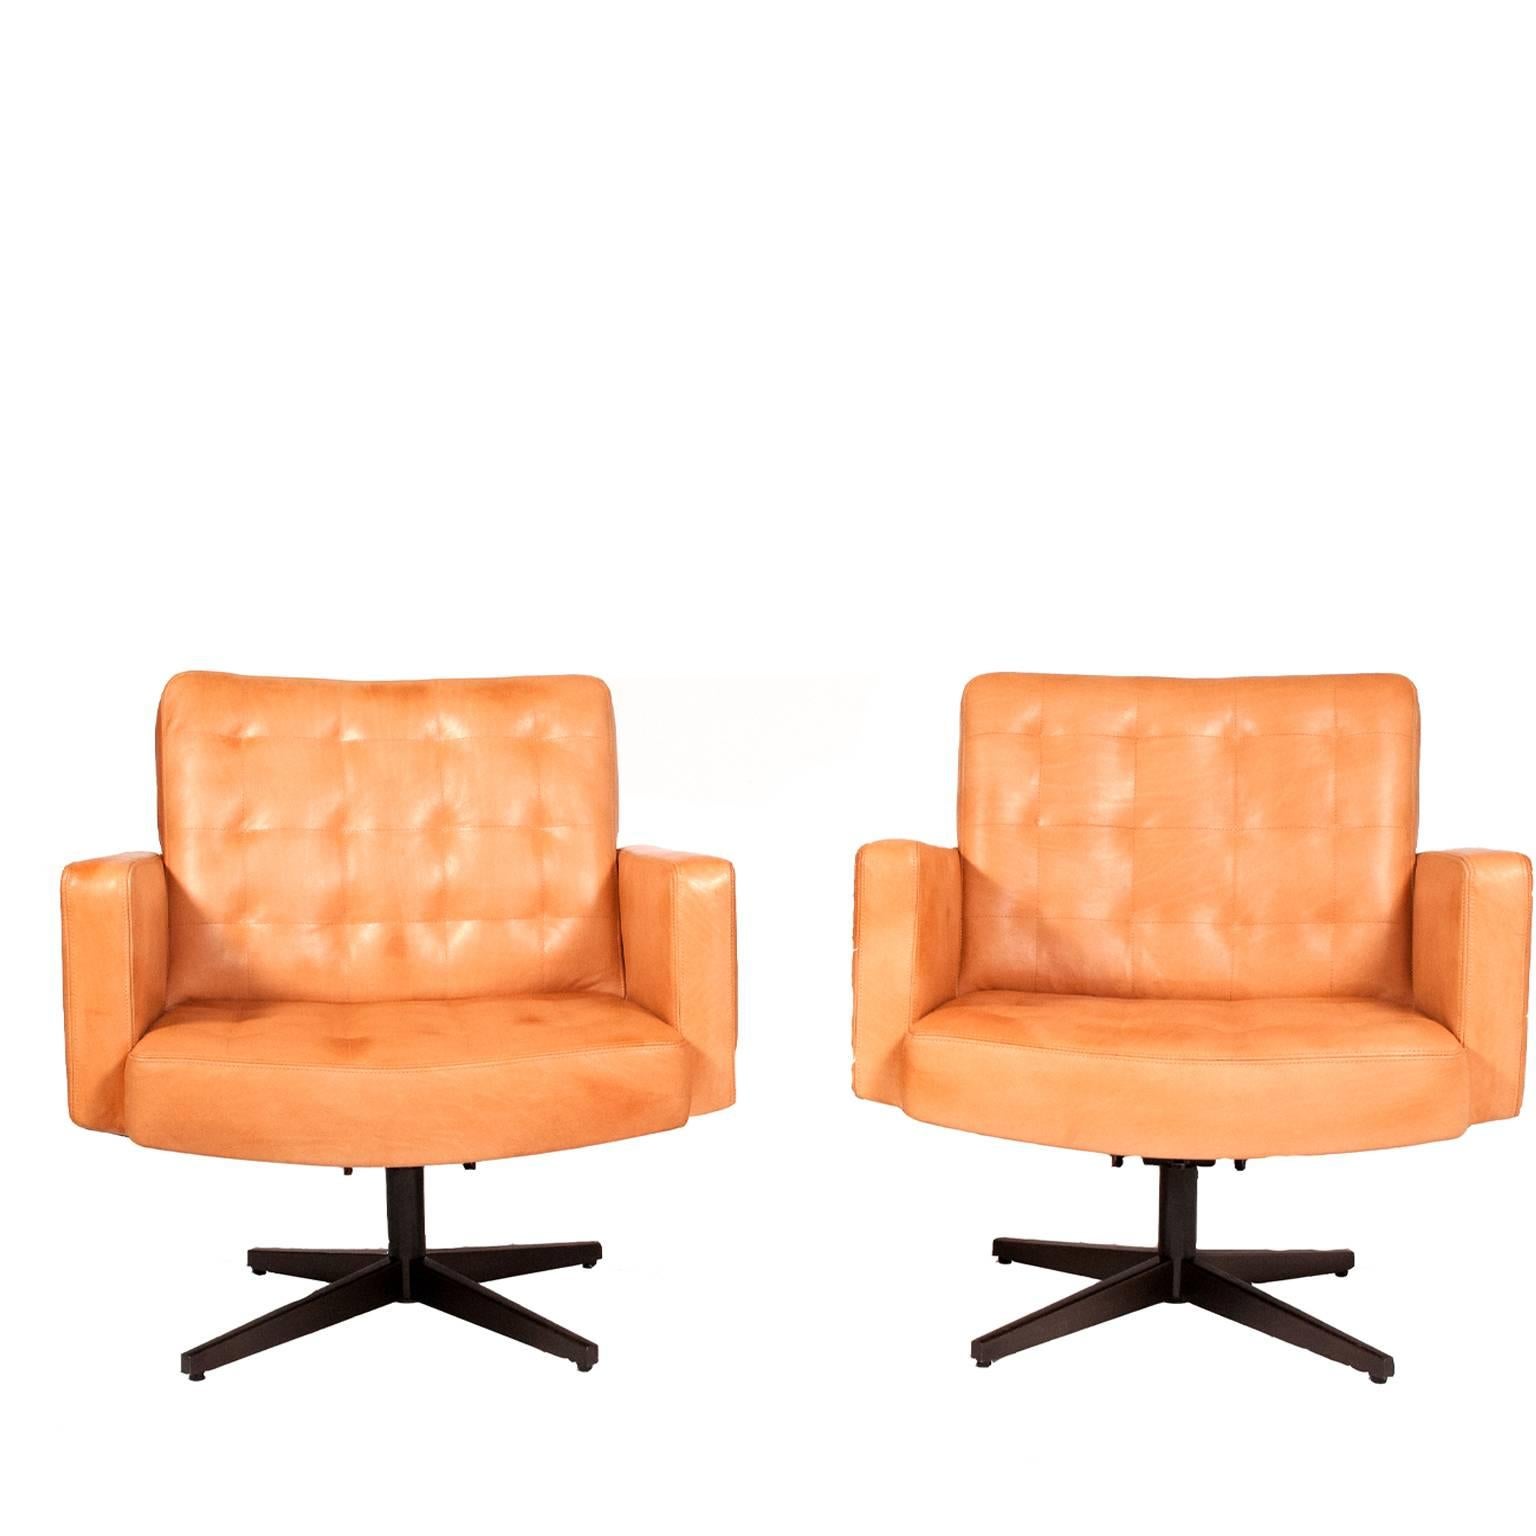 Mid-Century Modern Pair of Lounge Chairs by Vincent Cafiero for Knoll